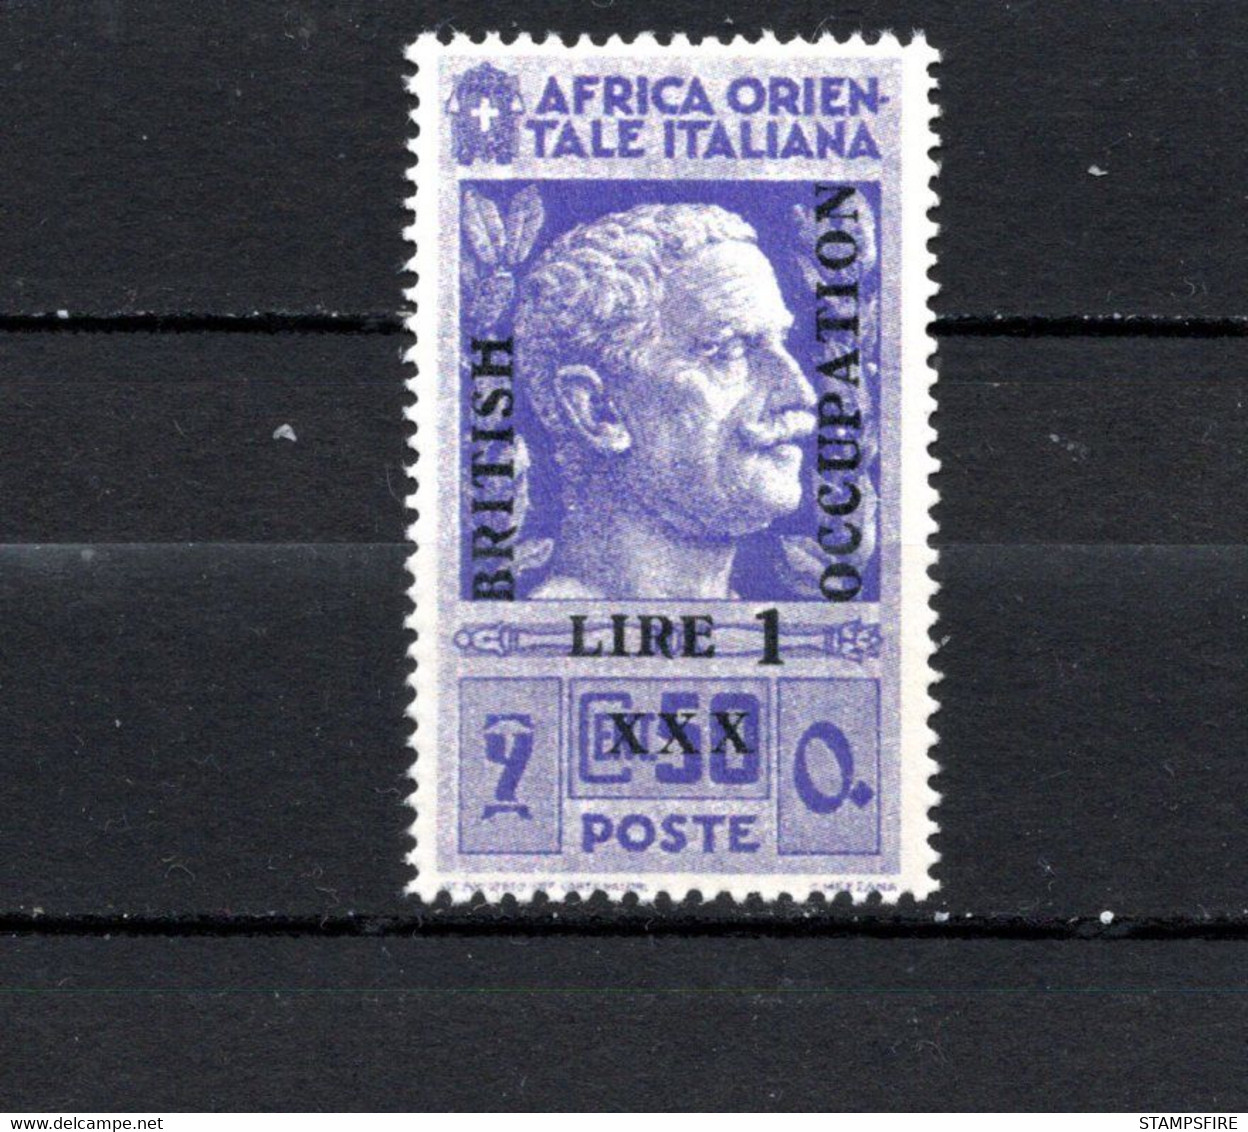 British Occupation Italy  Unissued 1941  Africa RARE MNH - Africa Oriental